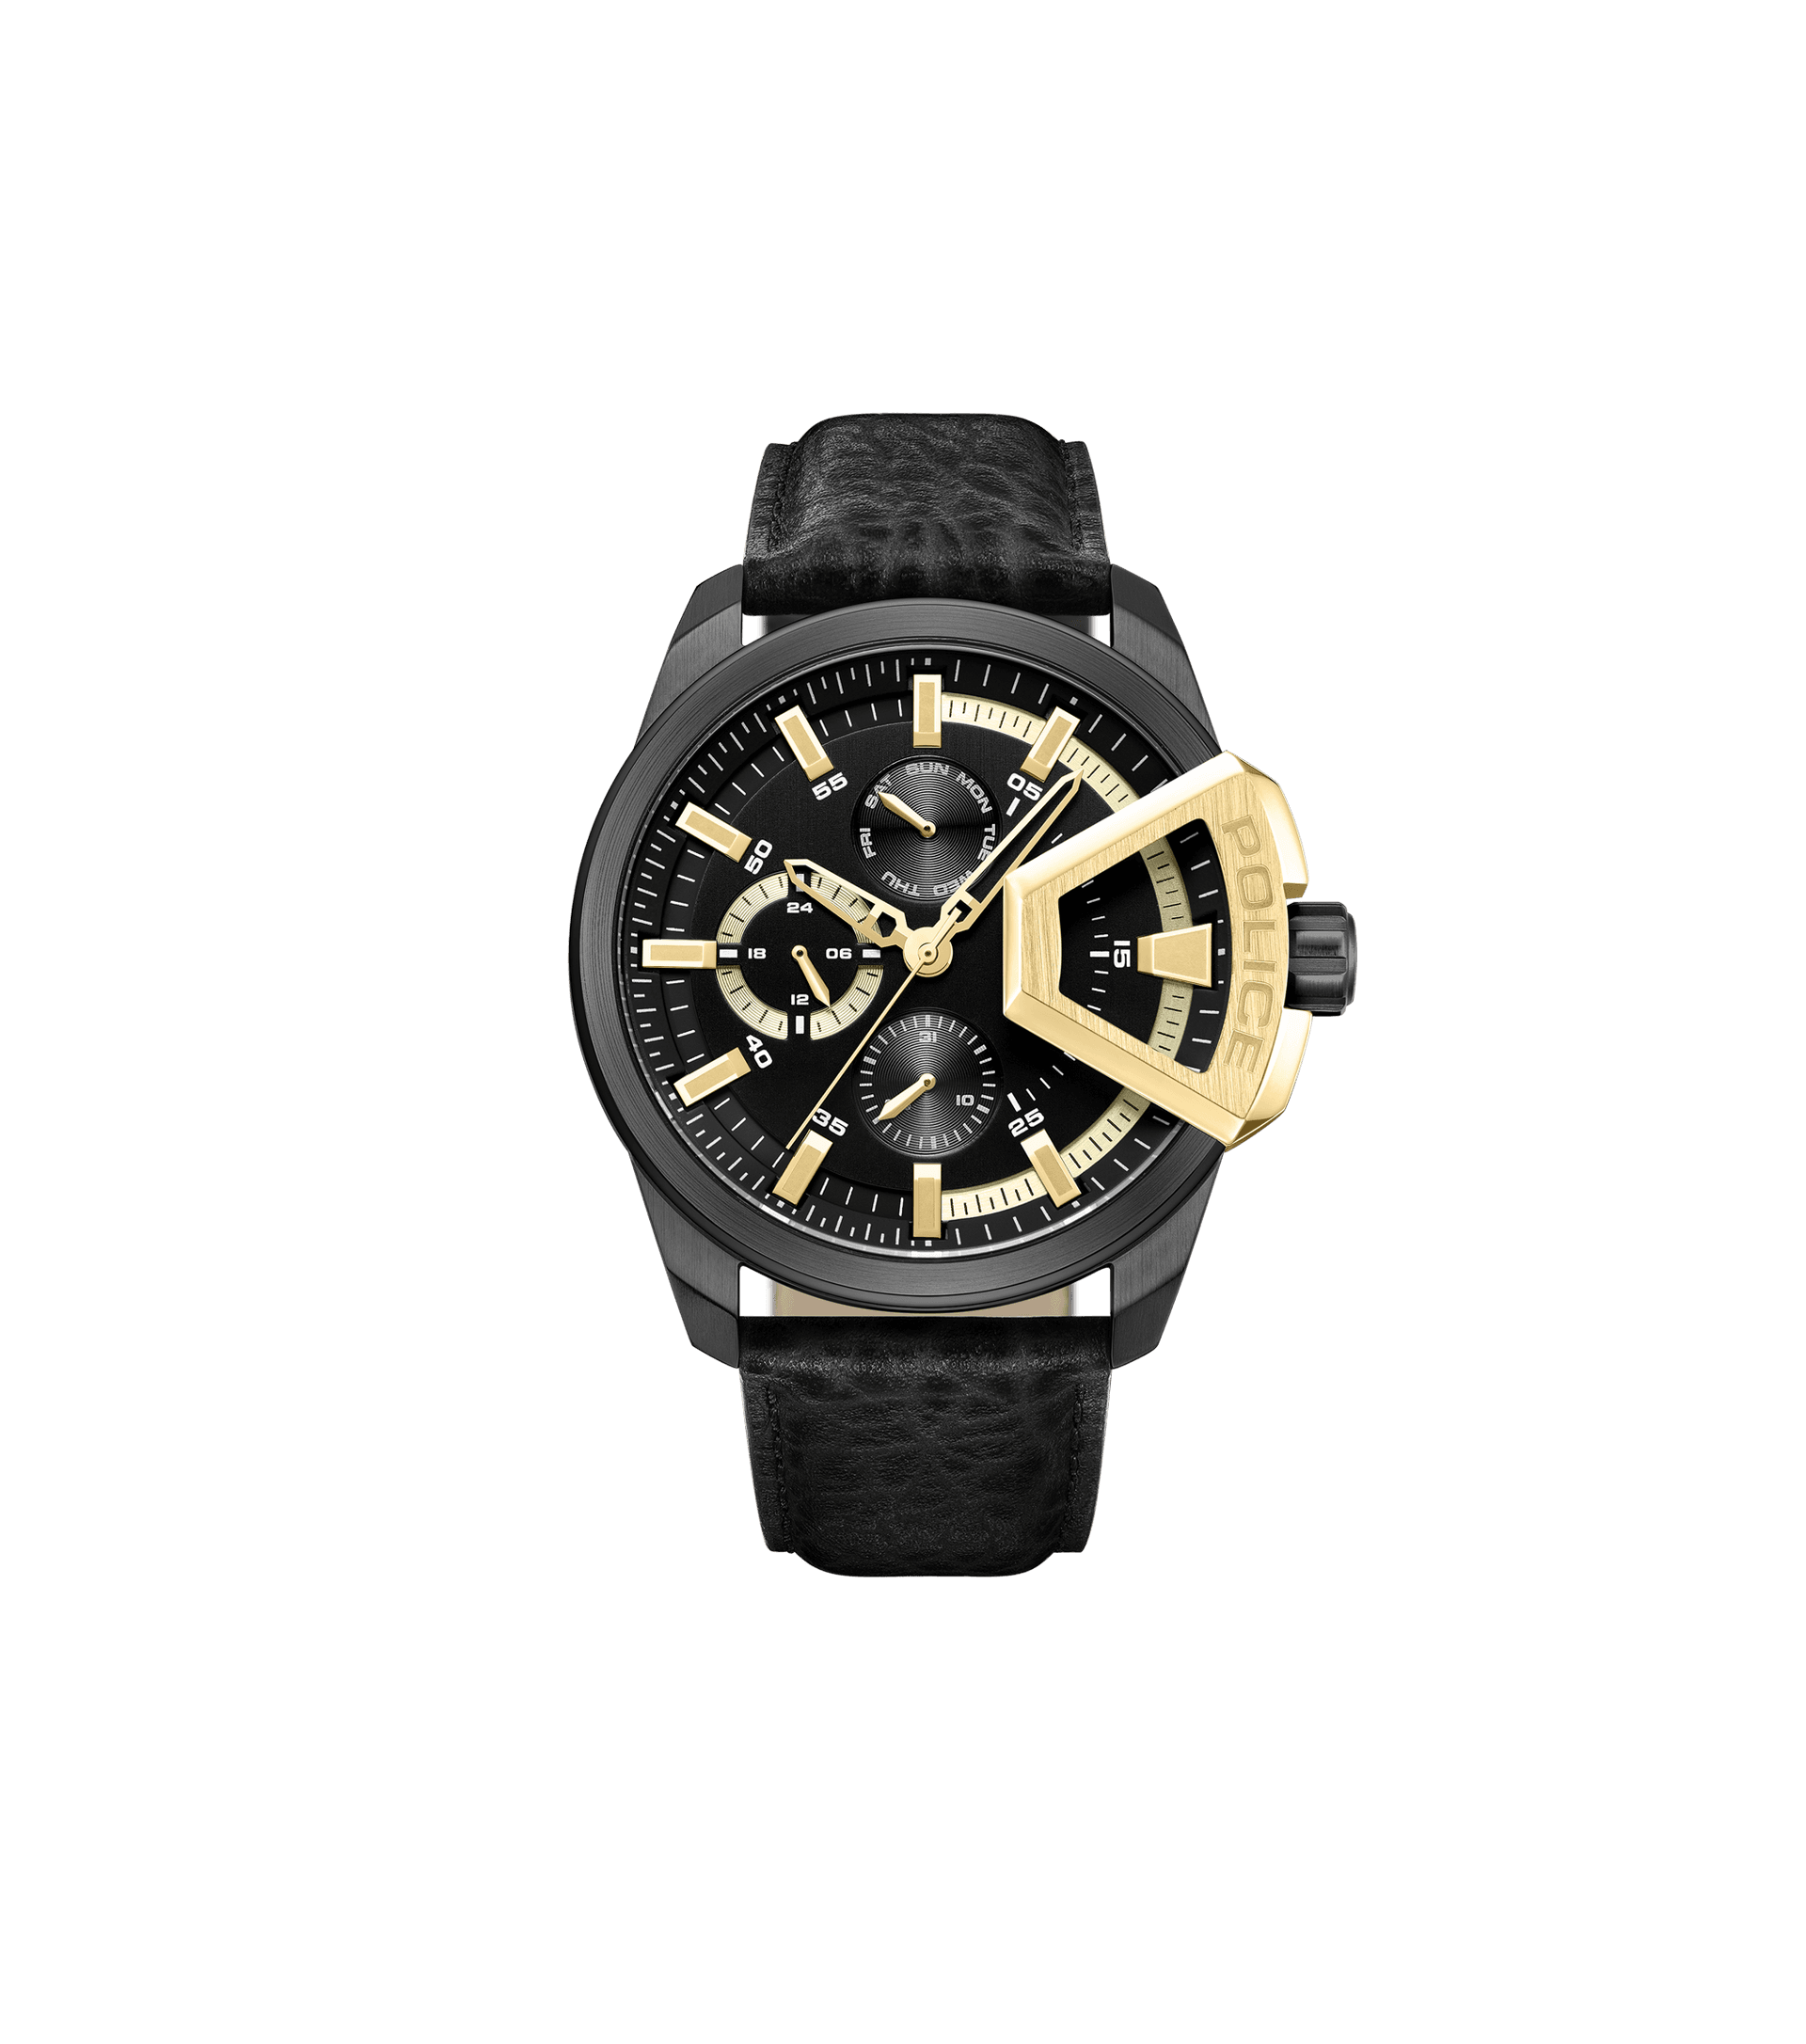 Police watches - Anniversary Black, Police Watch For The Black Set Gold, Bracelet Collection Men By And Gift